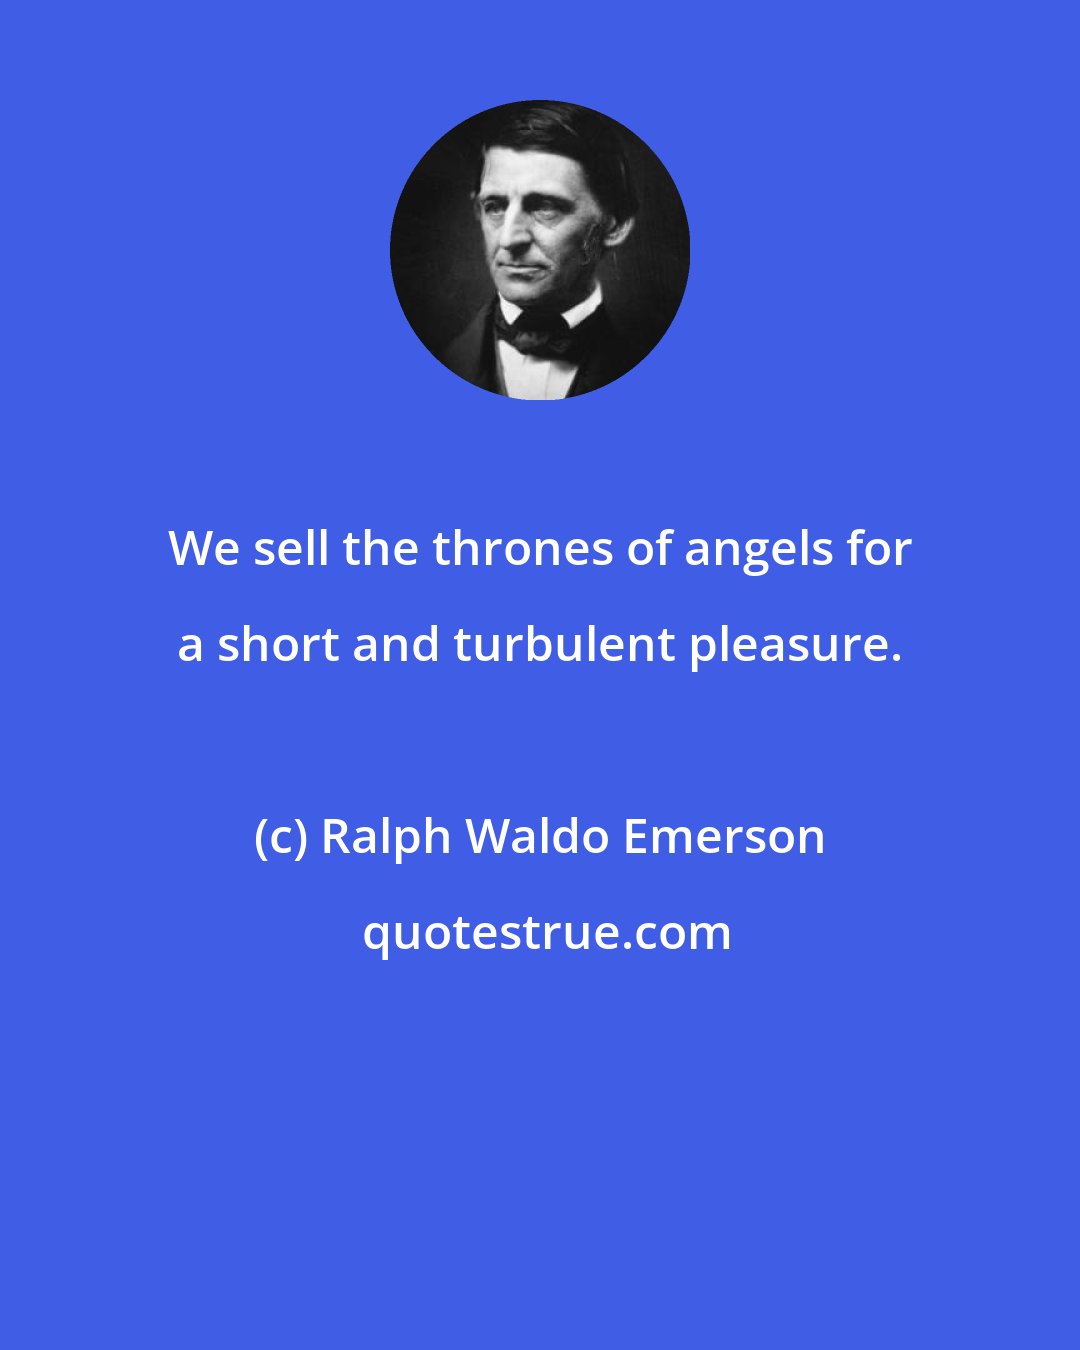 Ralph Waldo Emerson: We sell the thrones of angels for a short and turbulent pleasure.